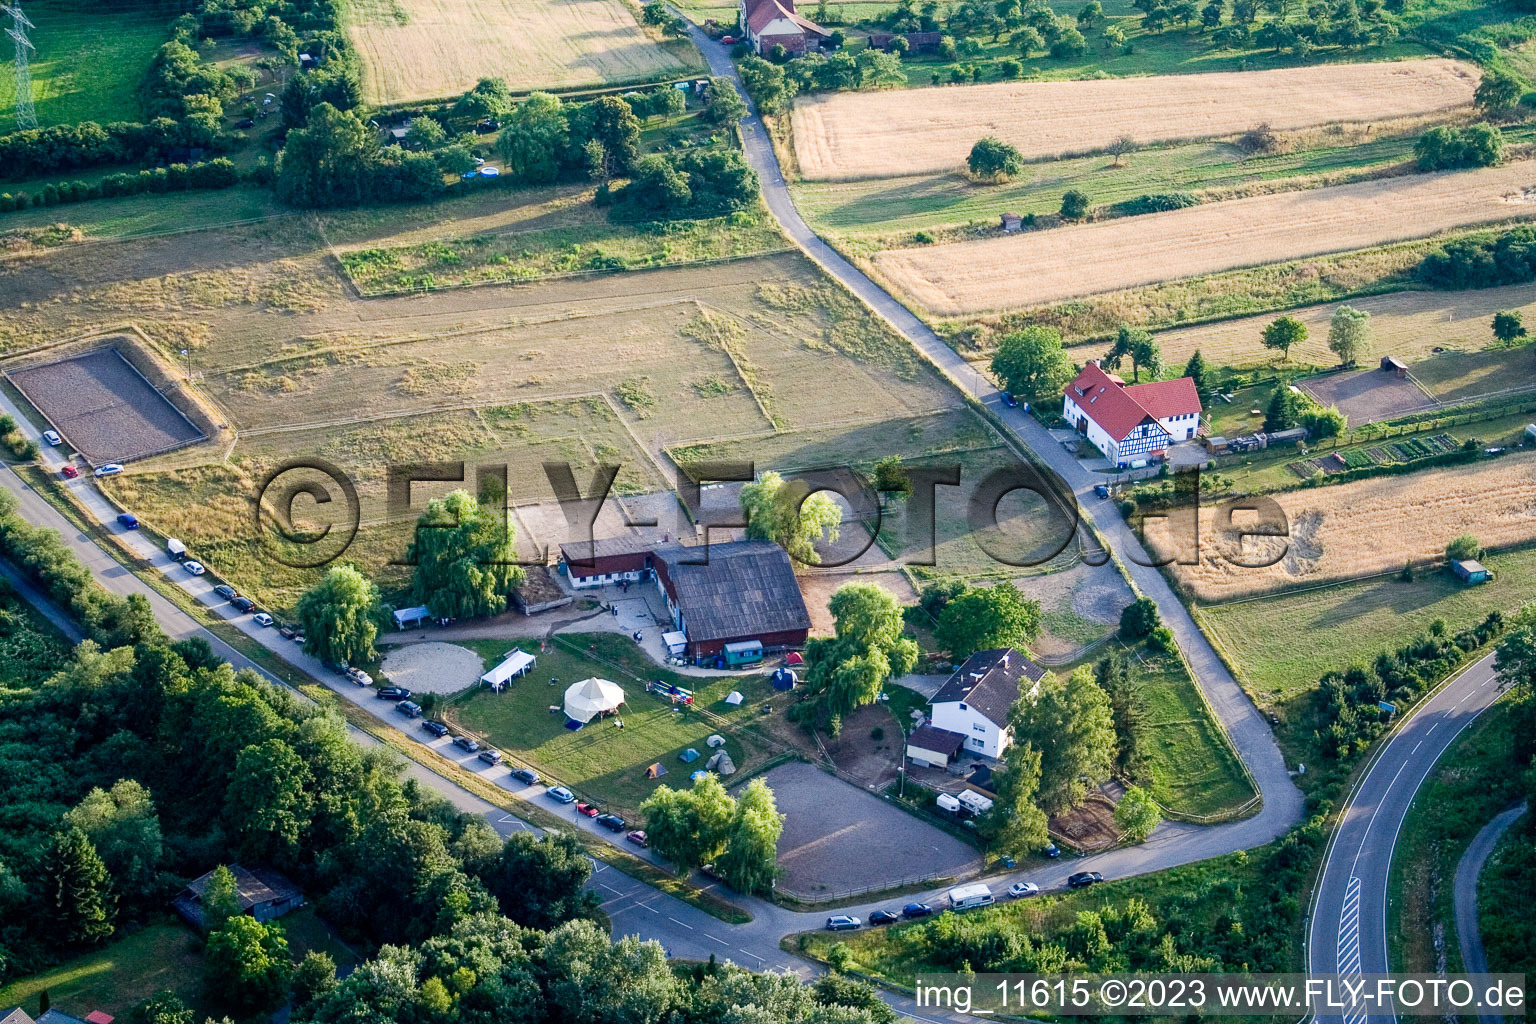 Drone image of Reithof Trab eV therapeutic riding on Lake Constance in the district Wollmatingen in Konstanz in the state Baden-Wuerttemberg, Germany